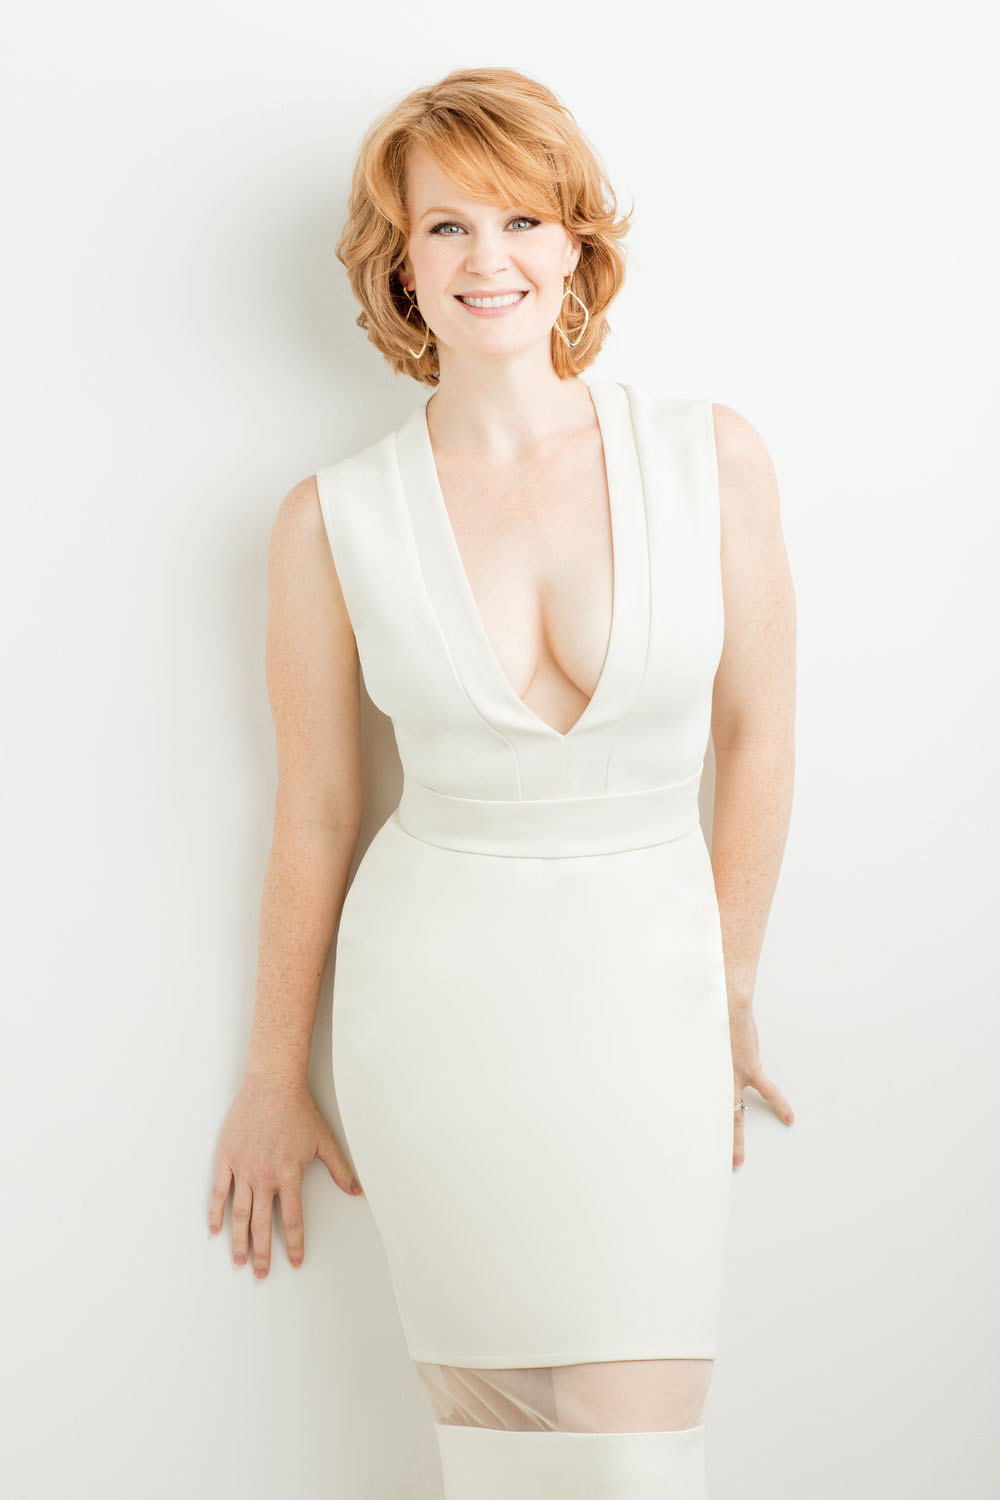 Interview With Kate Baldwin